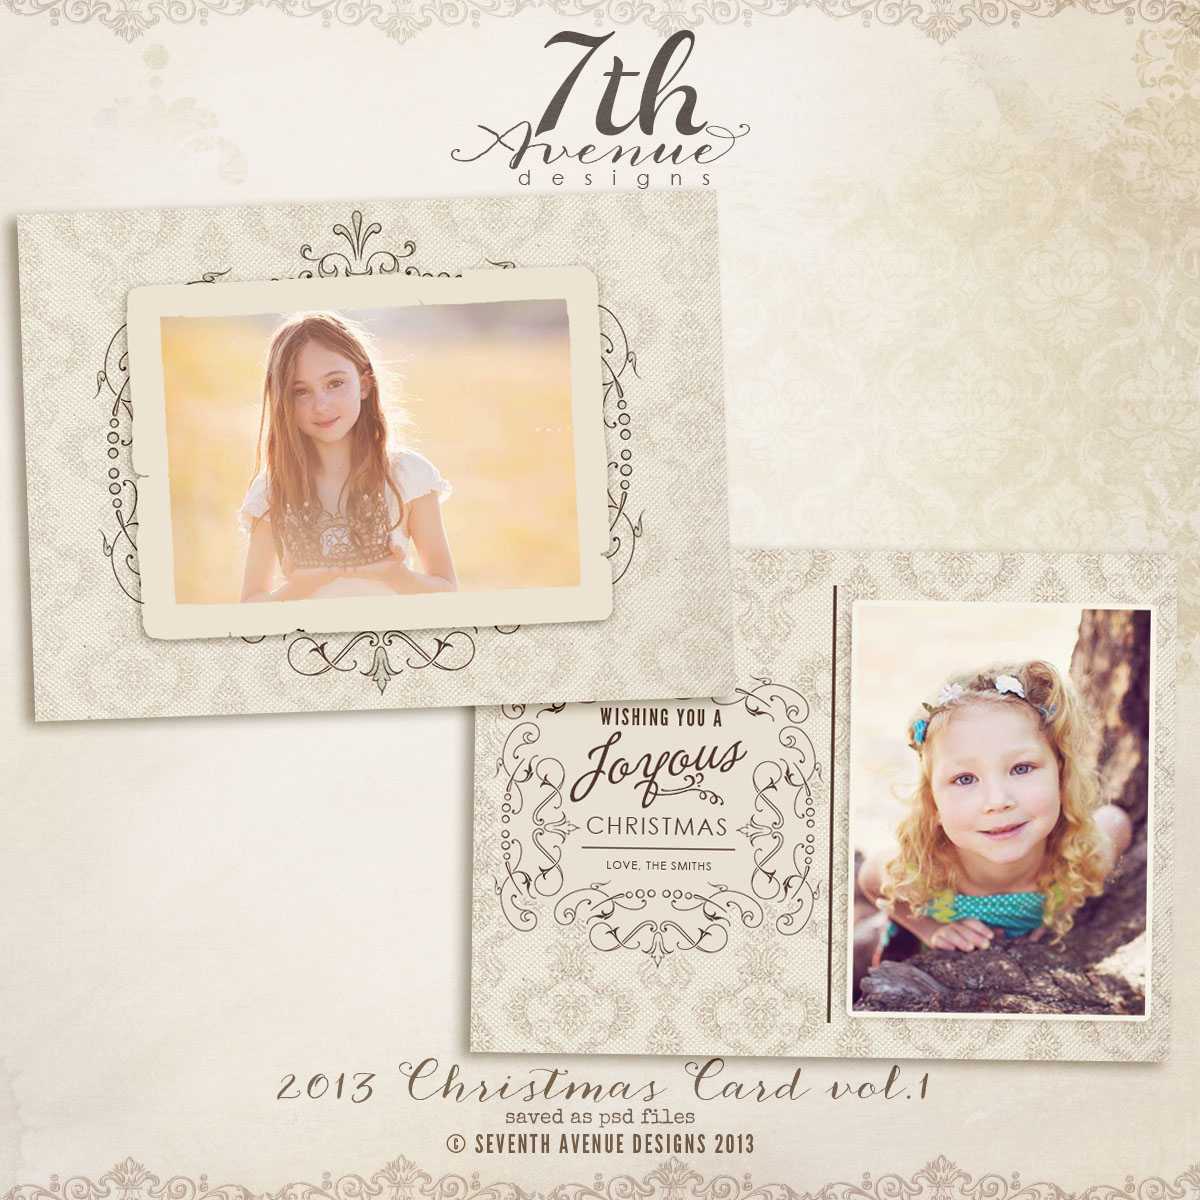 All Products : 7Thavenue Designs :: Logo And Templates Regarding Free Photoshop Christmas Card Templates For Photographers